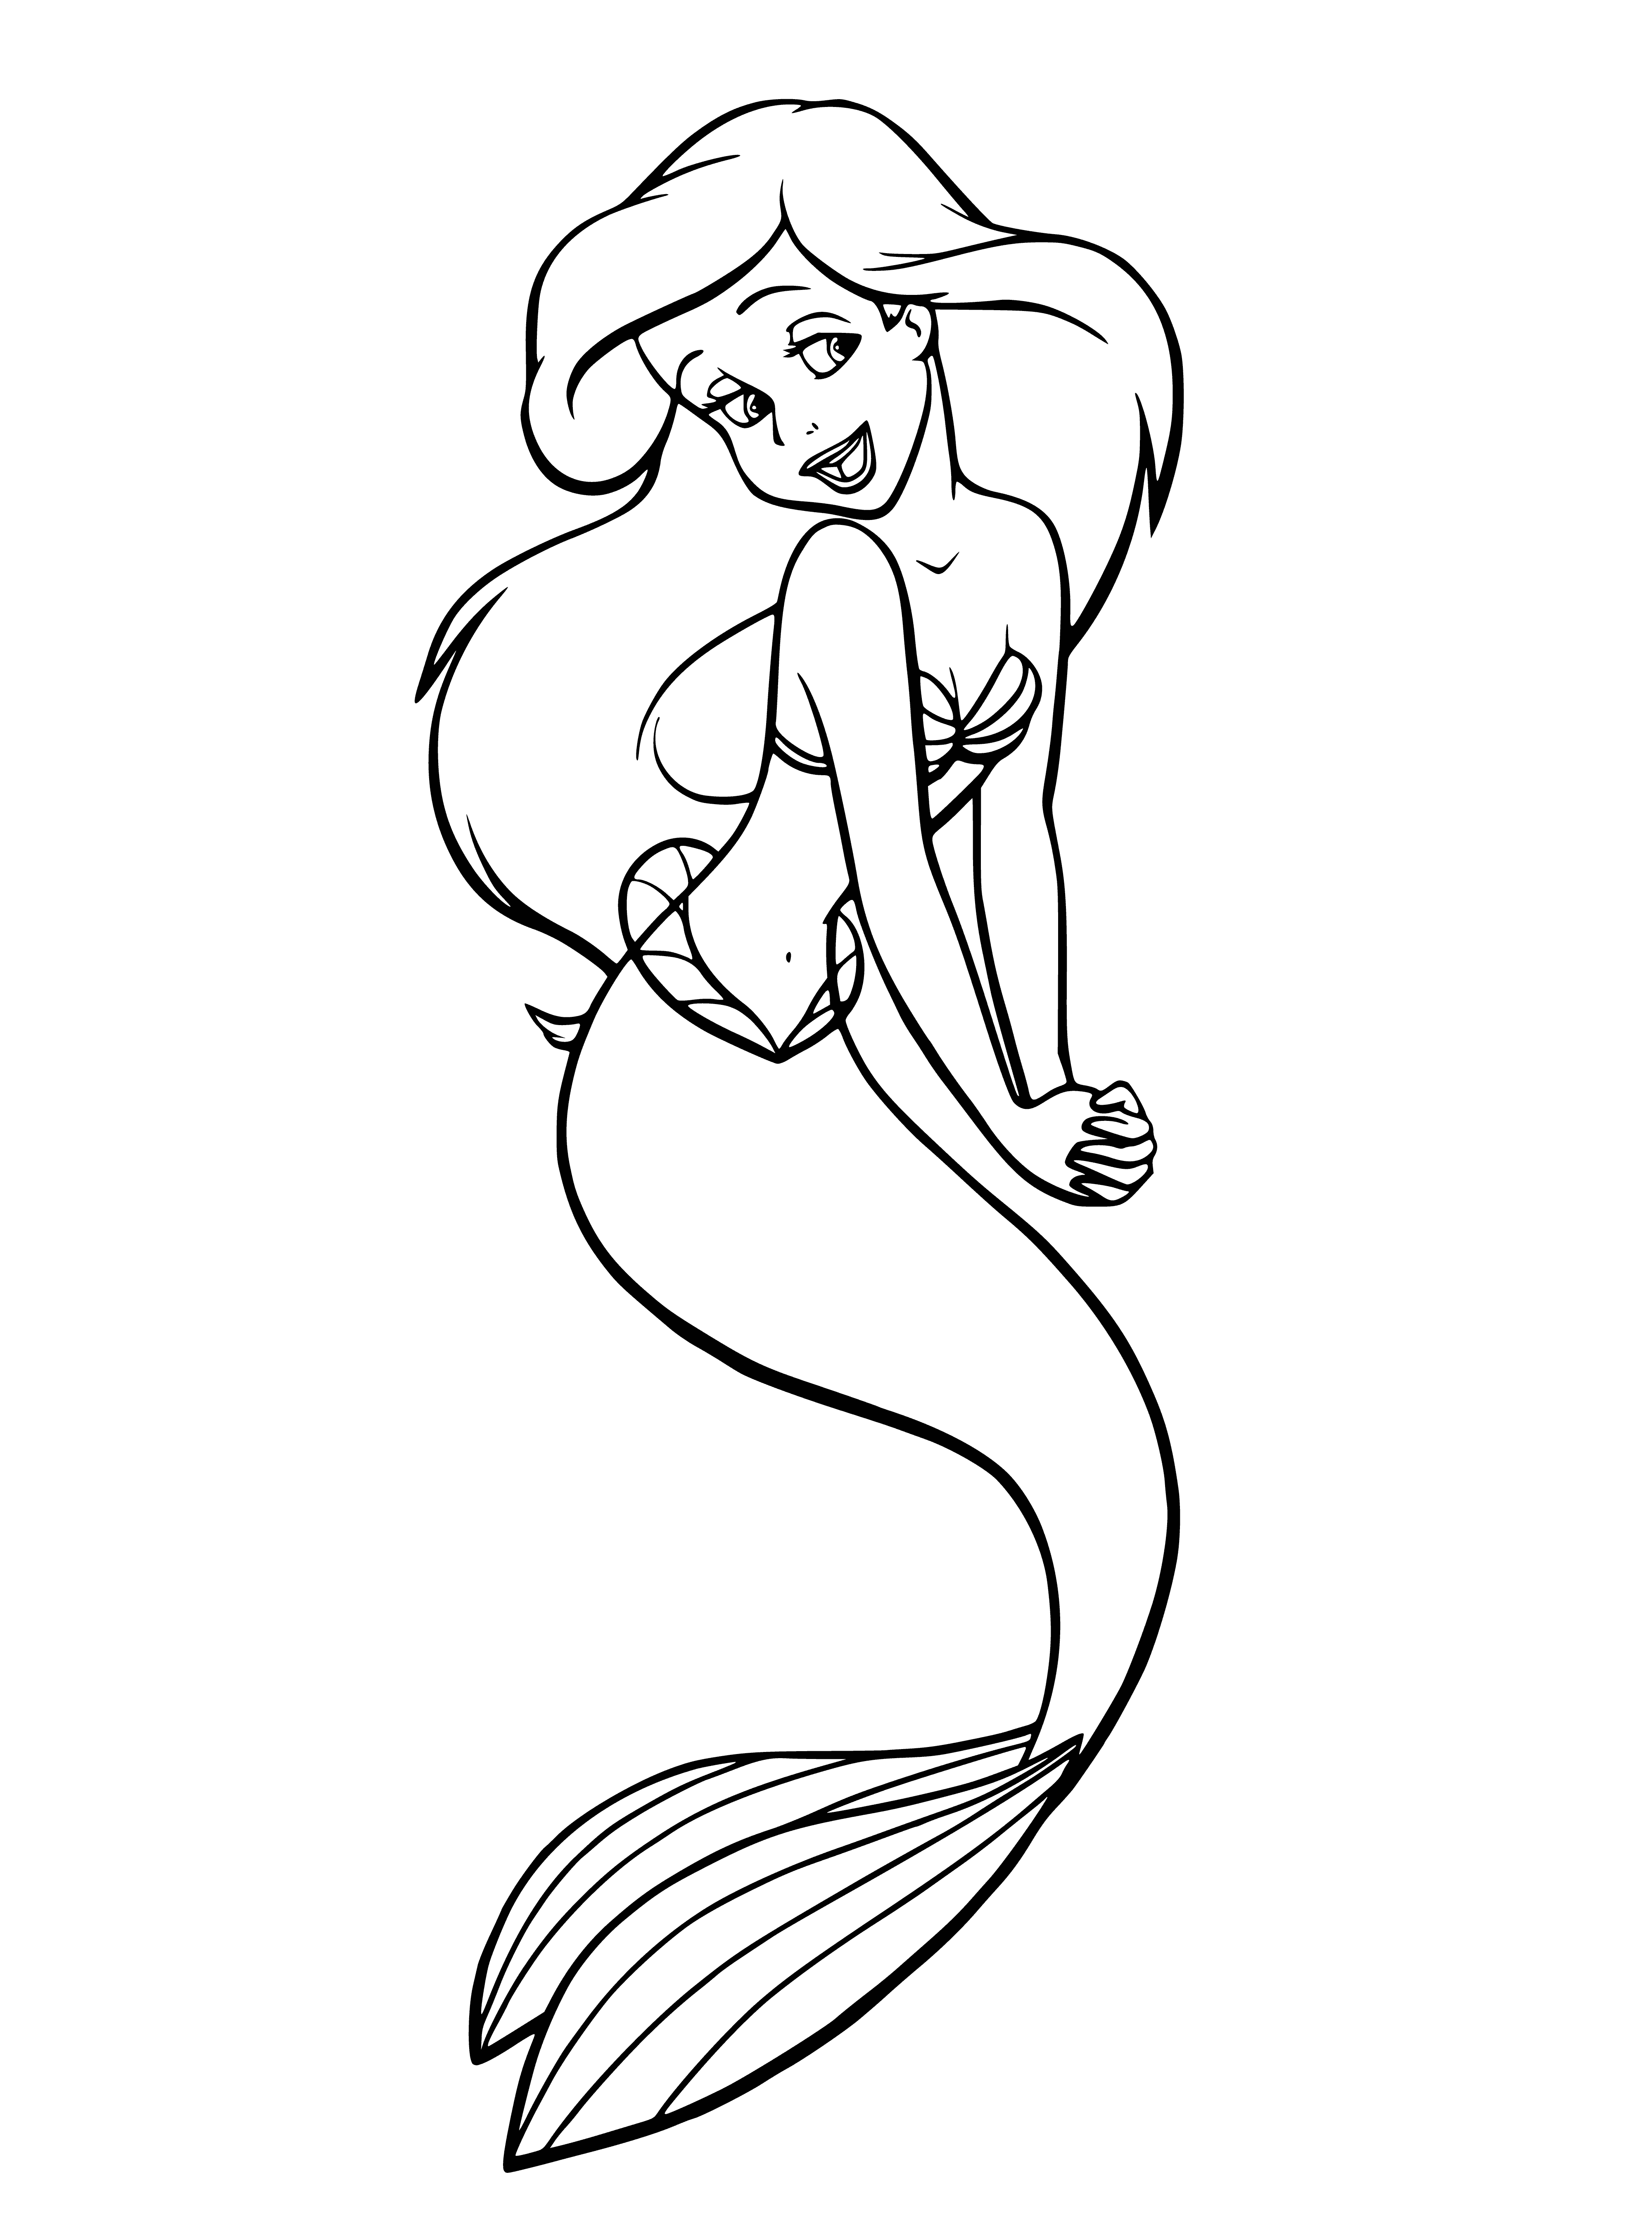 coloring page: Mermaid w/ red hair, green tail & purple Seashell bra sits on rock in light blue water surrounded by coral & holds starfish.